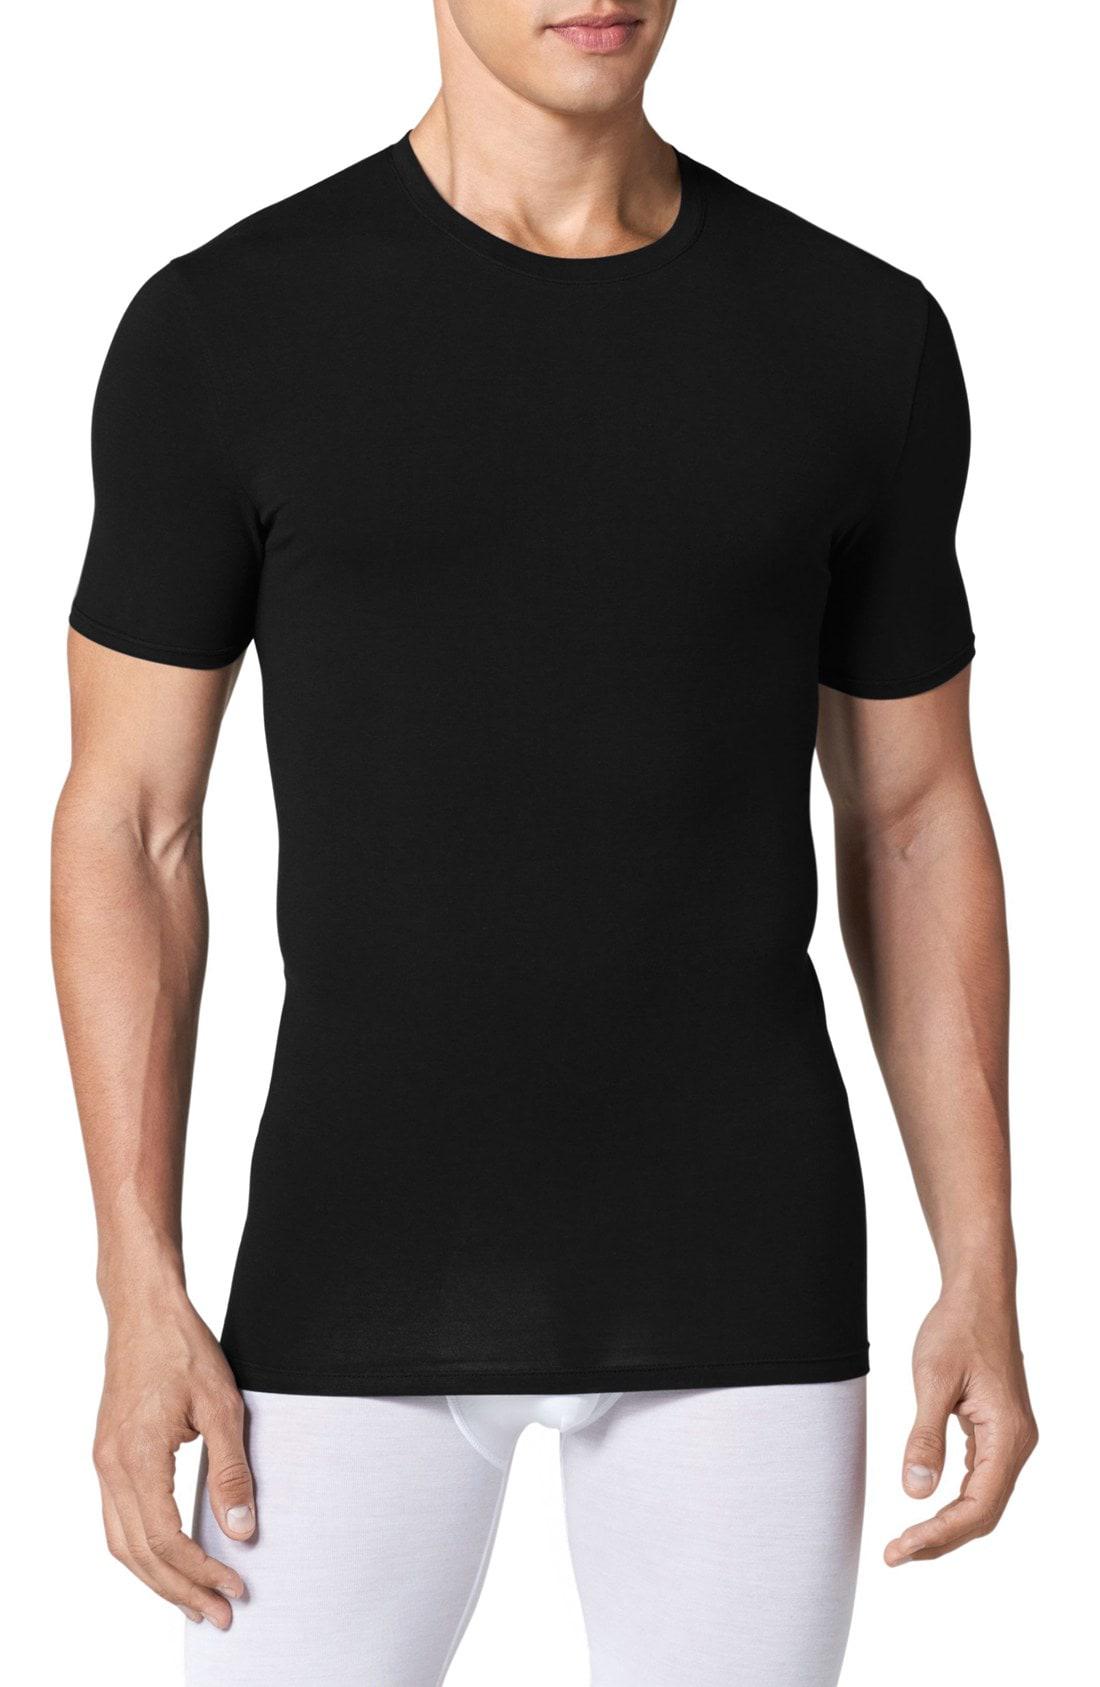 Lyst - Tommy John Second Skin Crewneck Tee in Black for Men - Save 7%